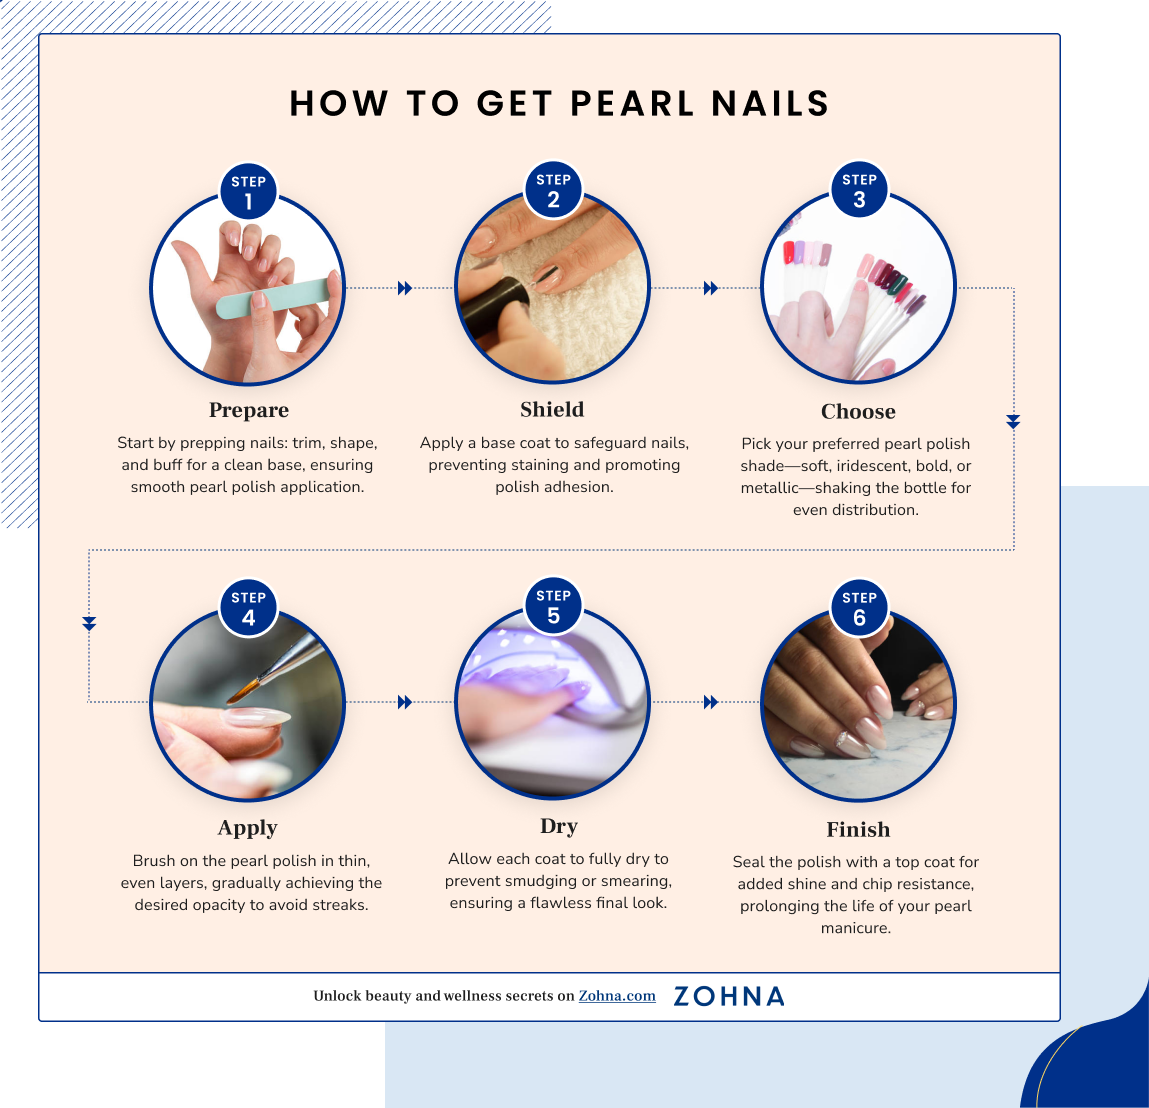 How To Get Pearl Nails